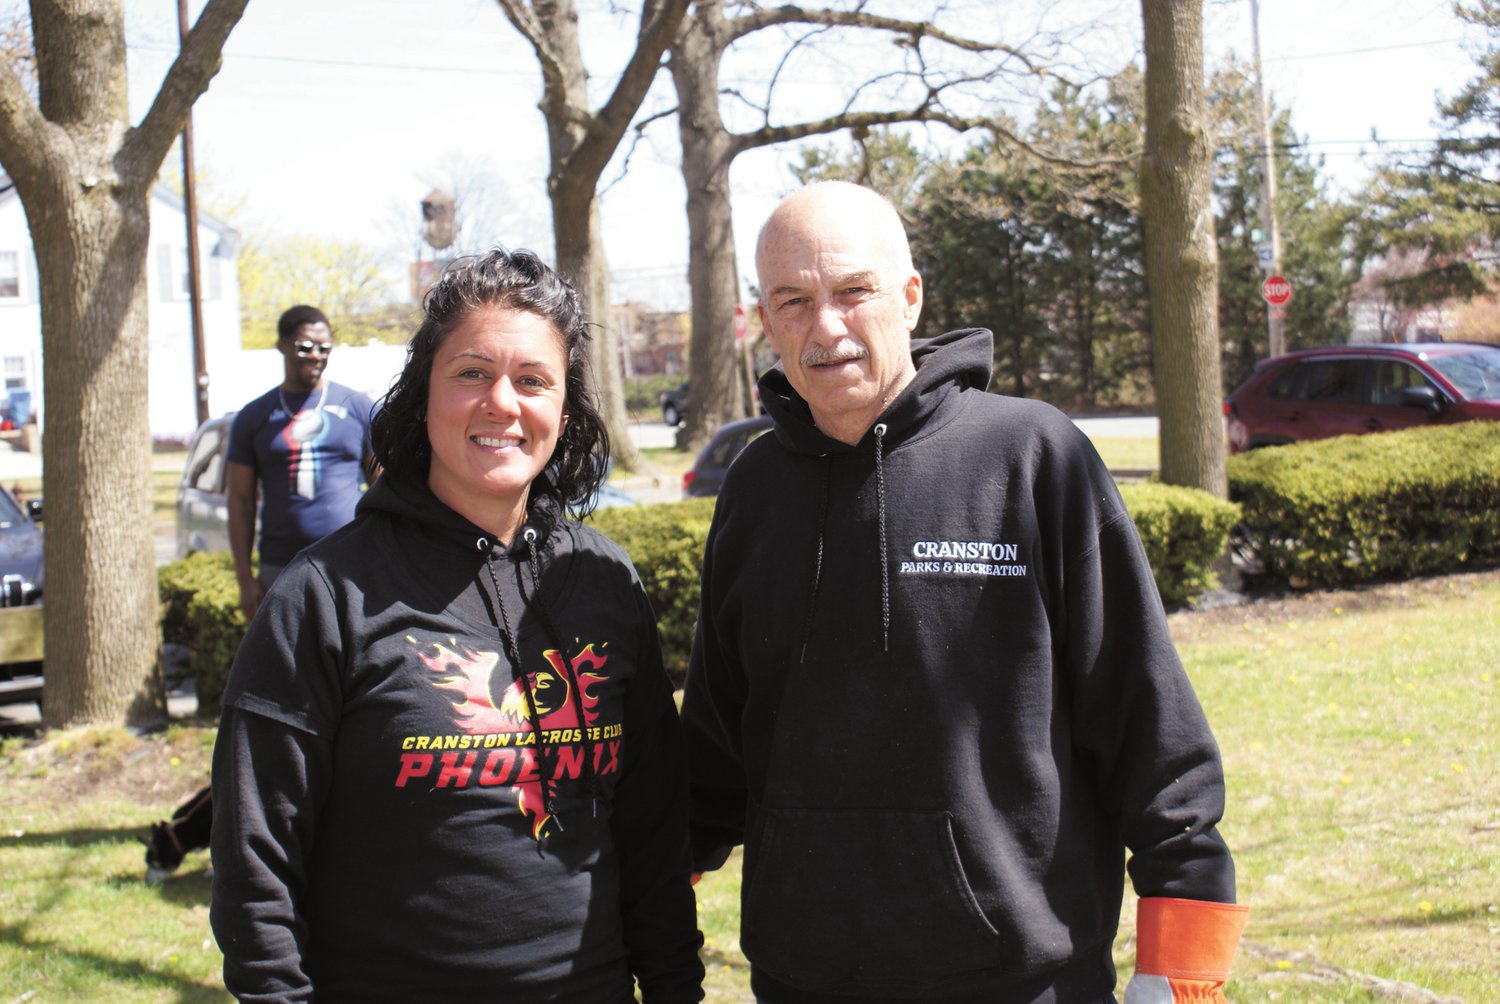 HELPING: Volunteering for the cleanup at Doric Field included City Wide Councilwoman Nicole Renzulli and Parks & Recreation Director Raymond Tessaglia.